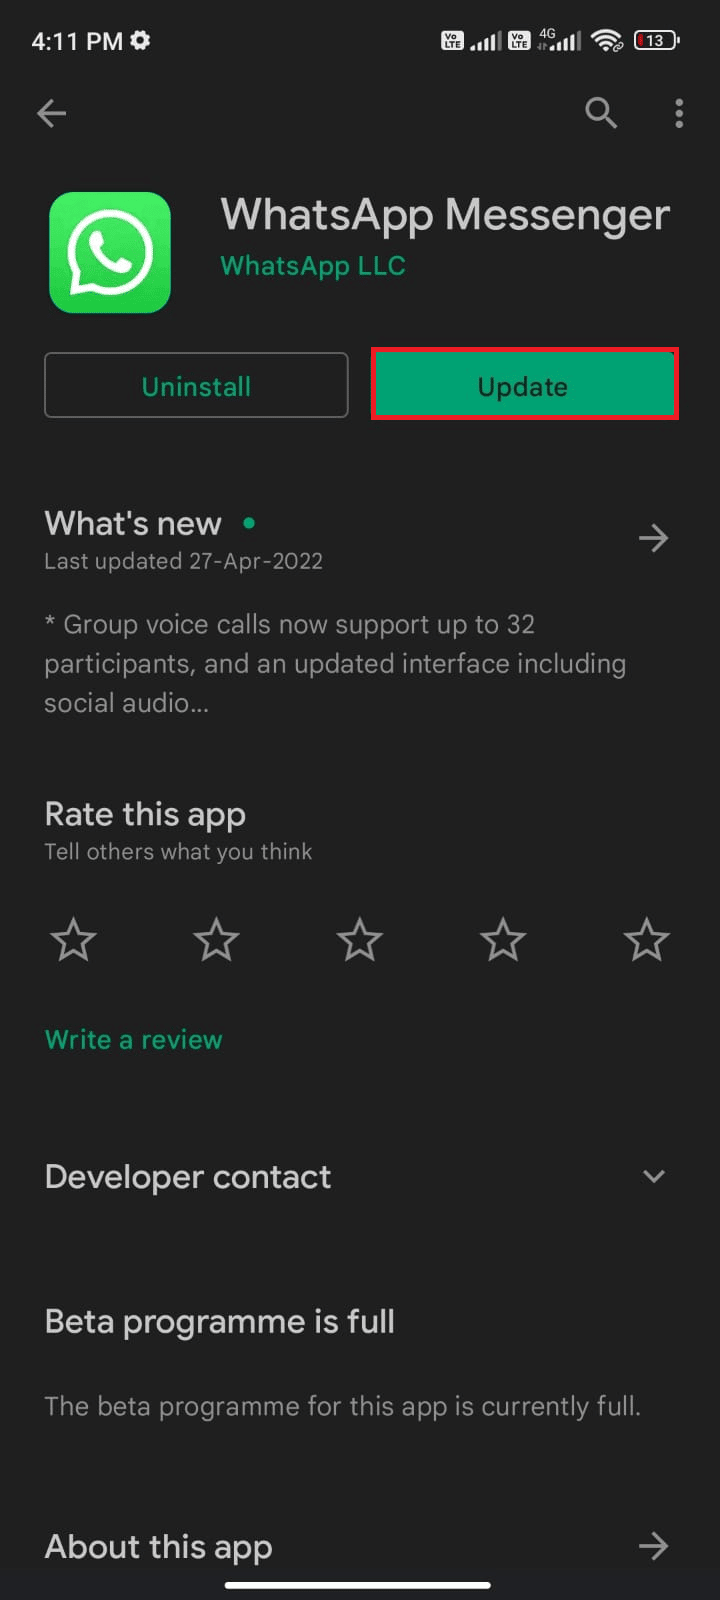 tap the Update option 